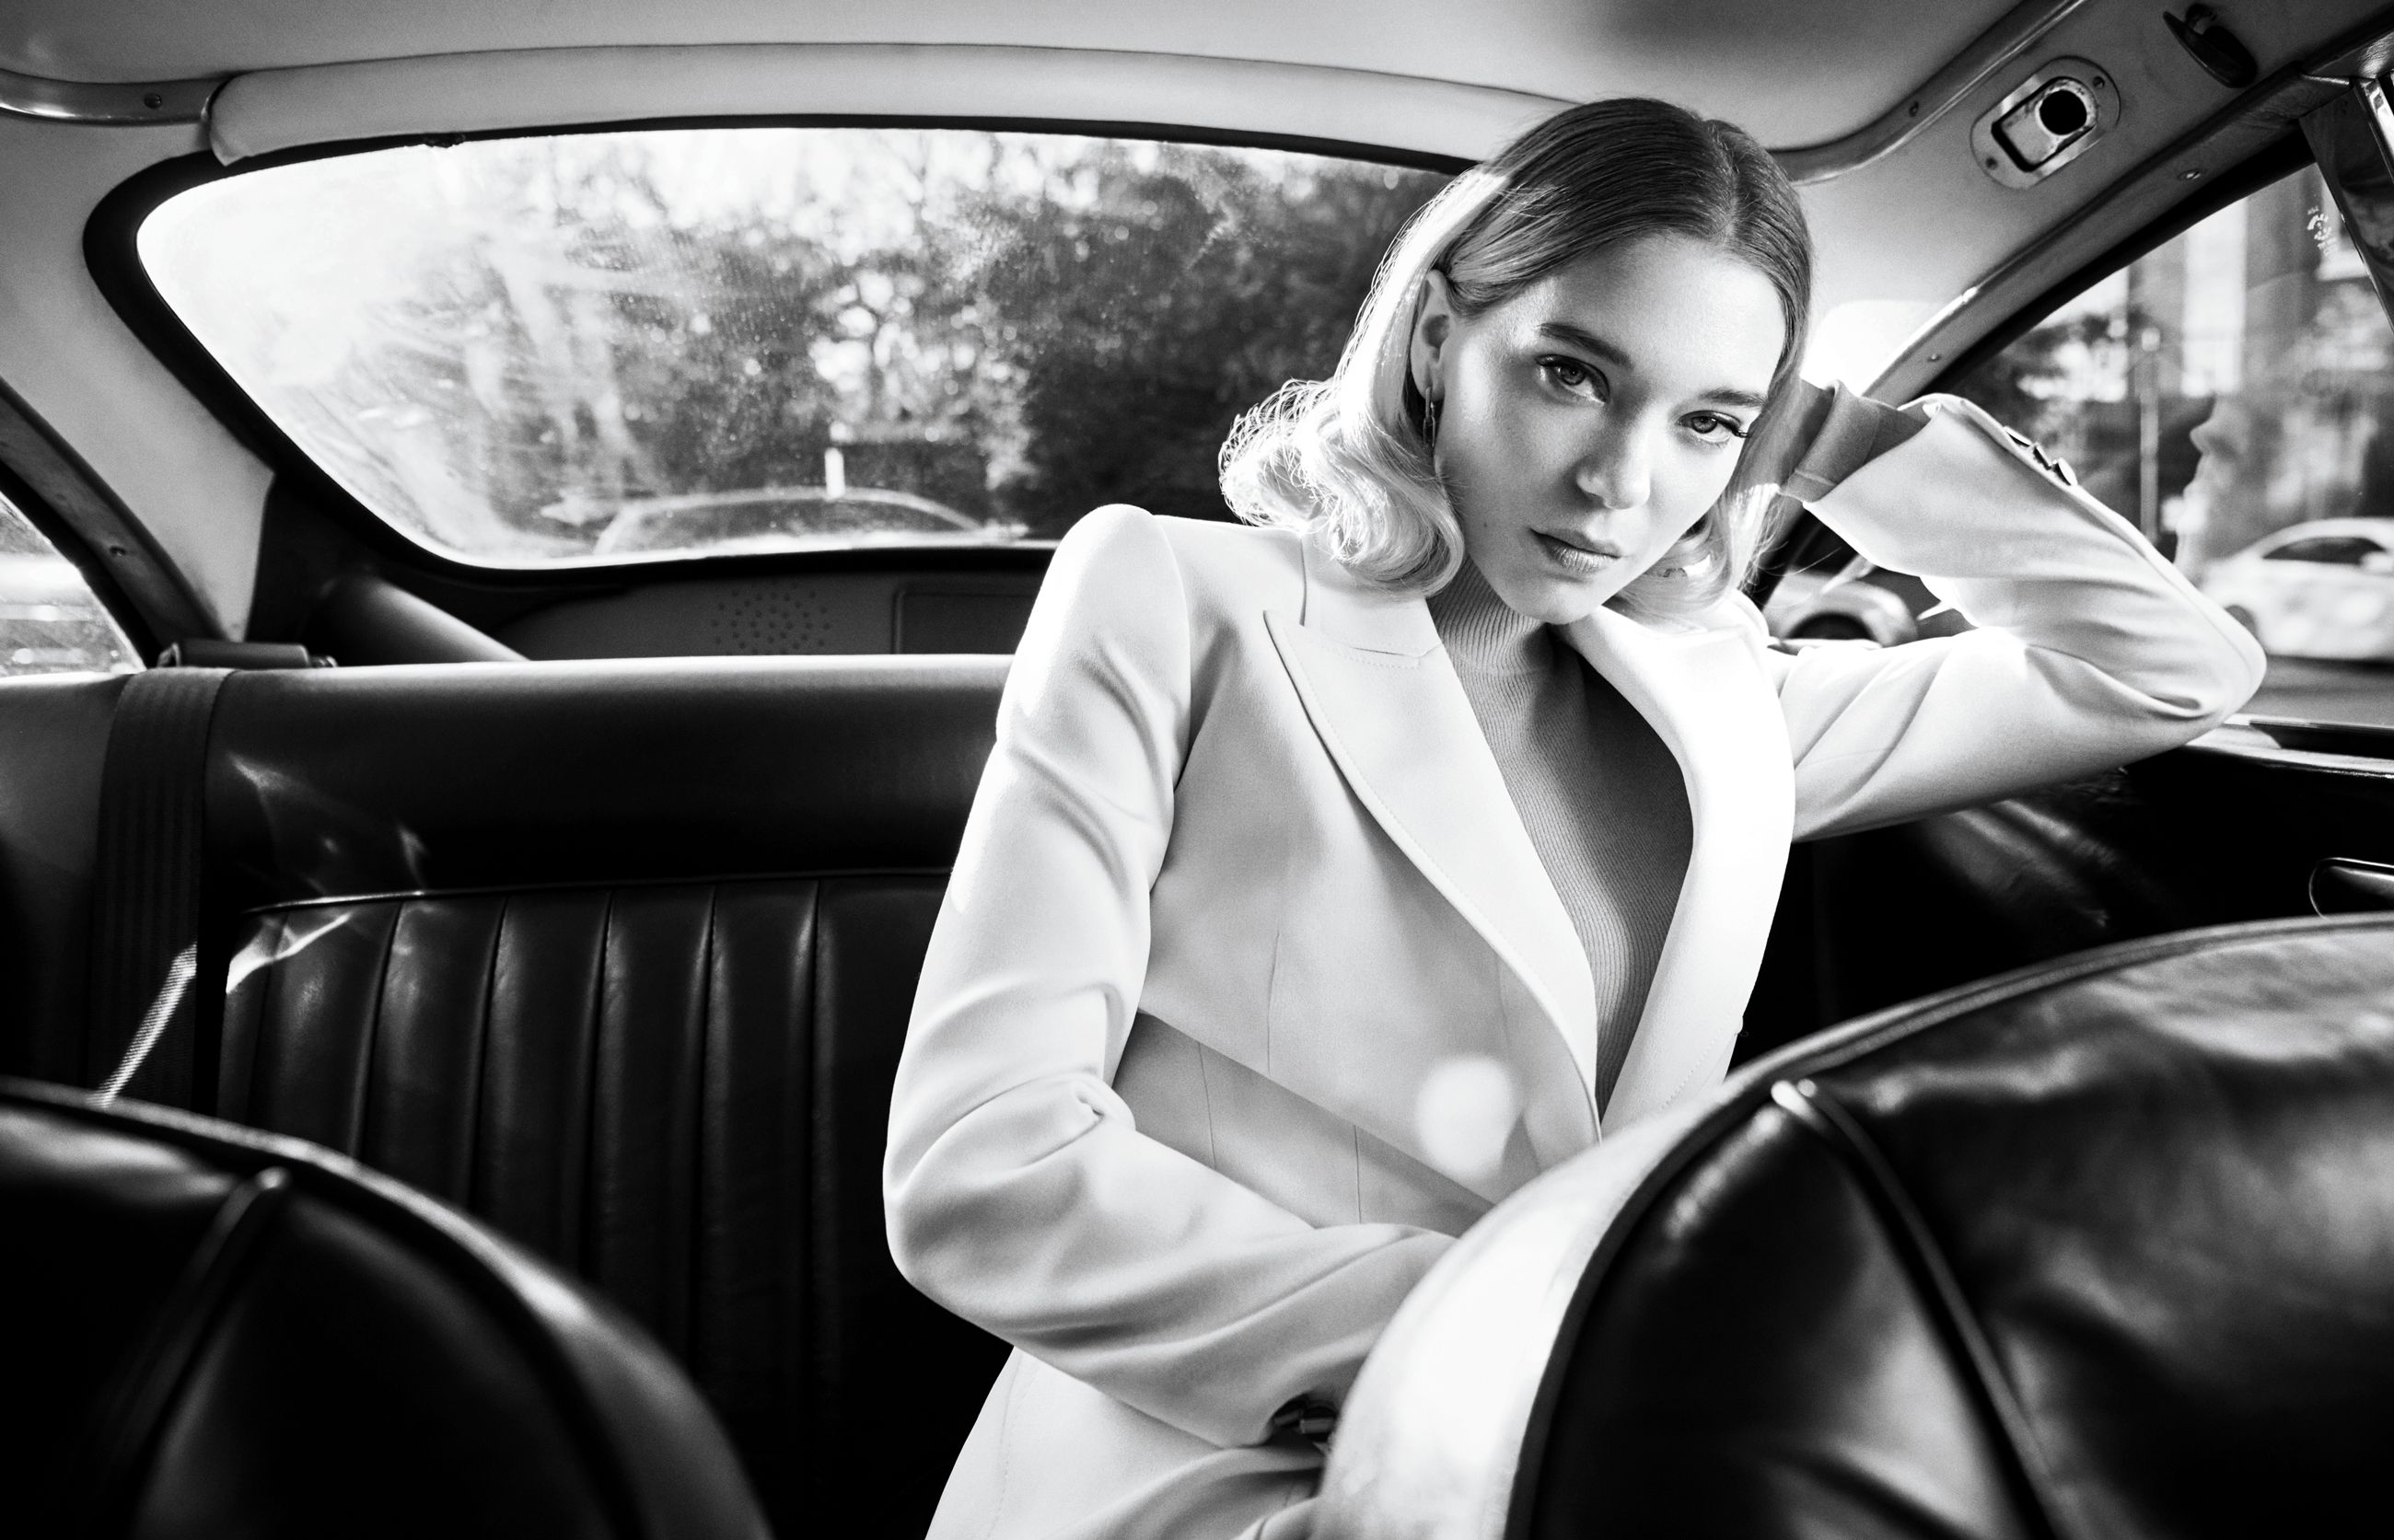 Léa Seydoux on No Time to Die & Not Being Your Average Bond Girl